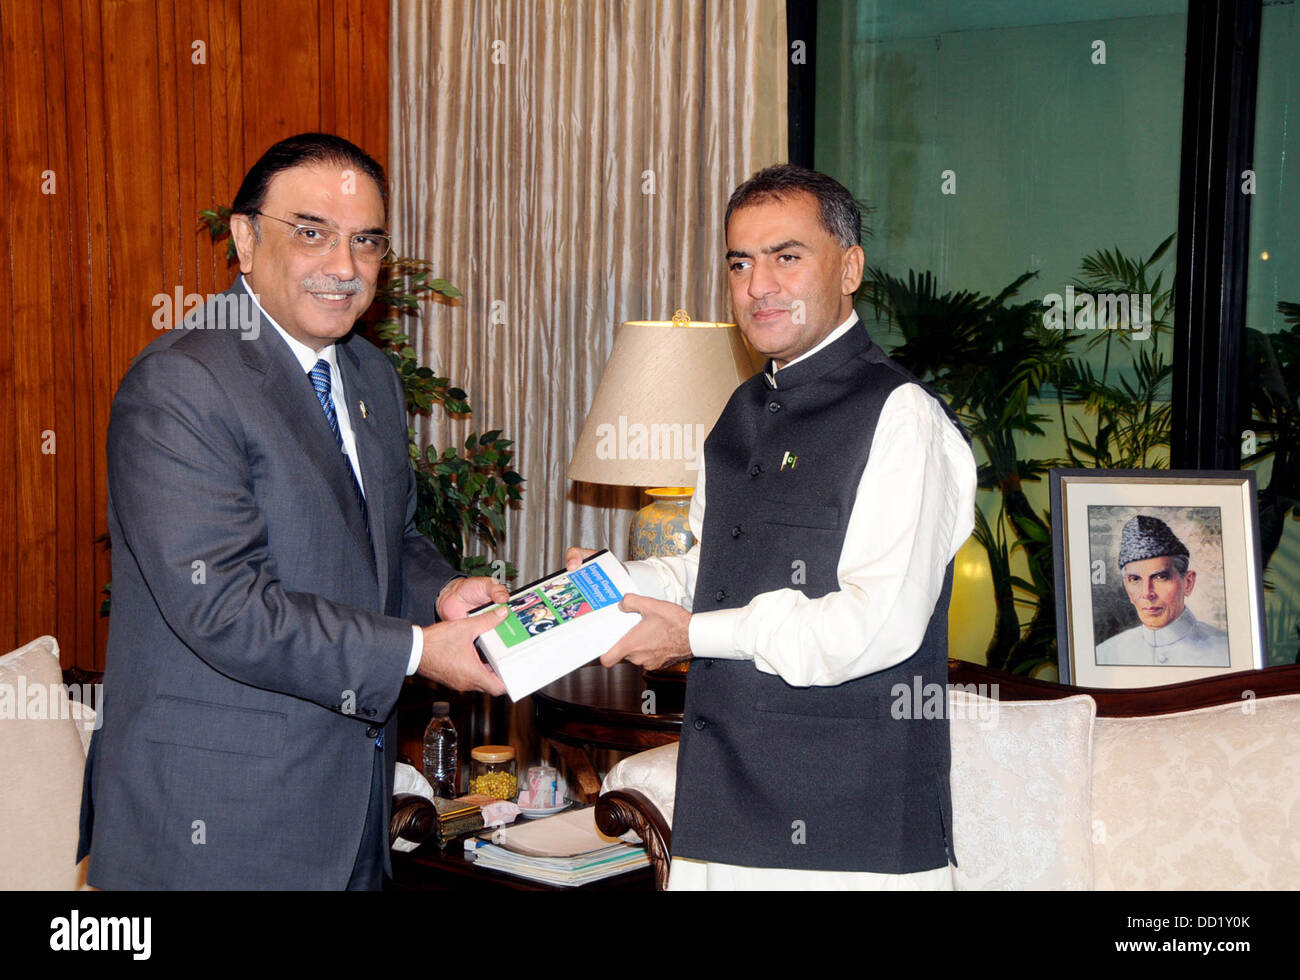 Islamabad, Pakistan. 23rd Aug, 2013. syed muhammad amin shah rashdi presenting his book to prresident asif ali zardari at the president palace 23 august 2013   Handout by Pakistan informtion department      (Photo by PID/Deanpictures/Alamy Live News) Stock Photo